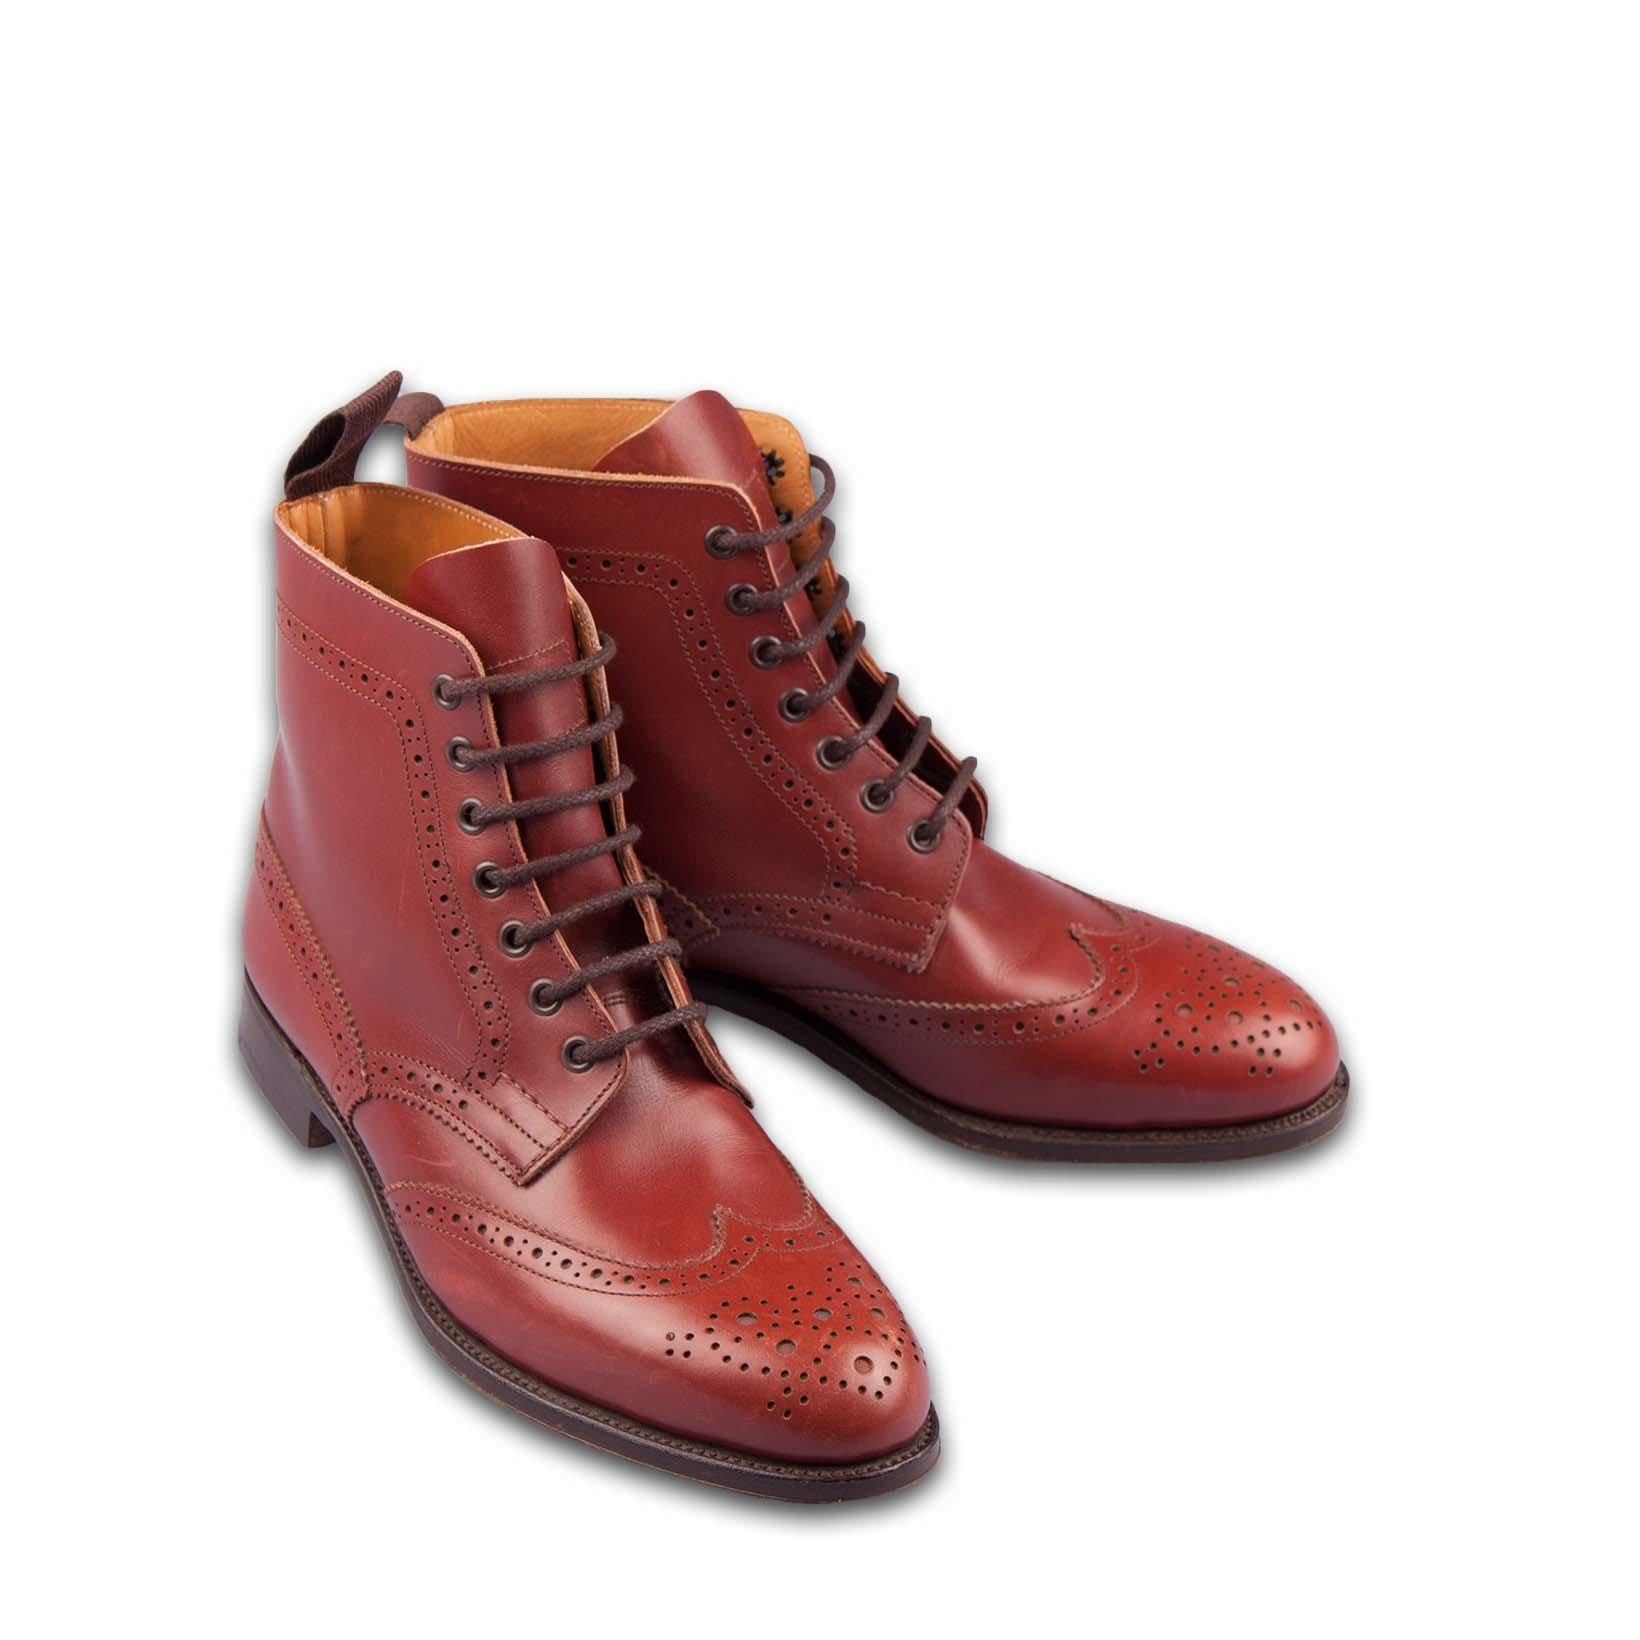 Ladies Lace Up Boot-Tricker's-Conrad Hasselbach Shoes & Garment